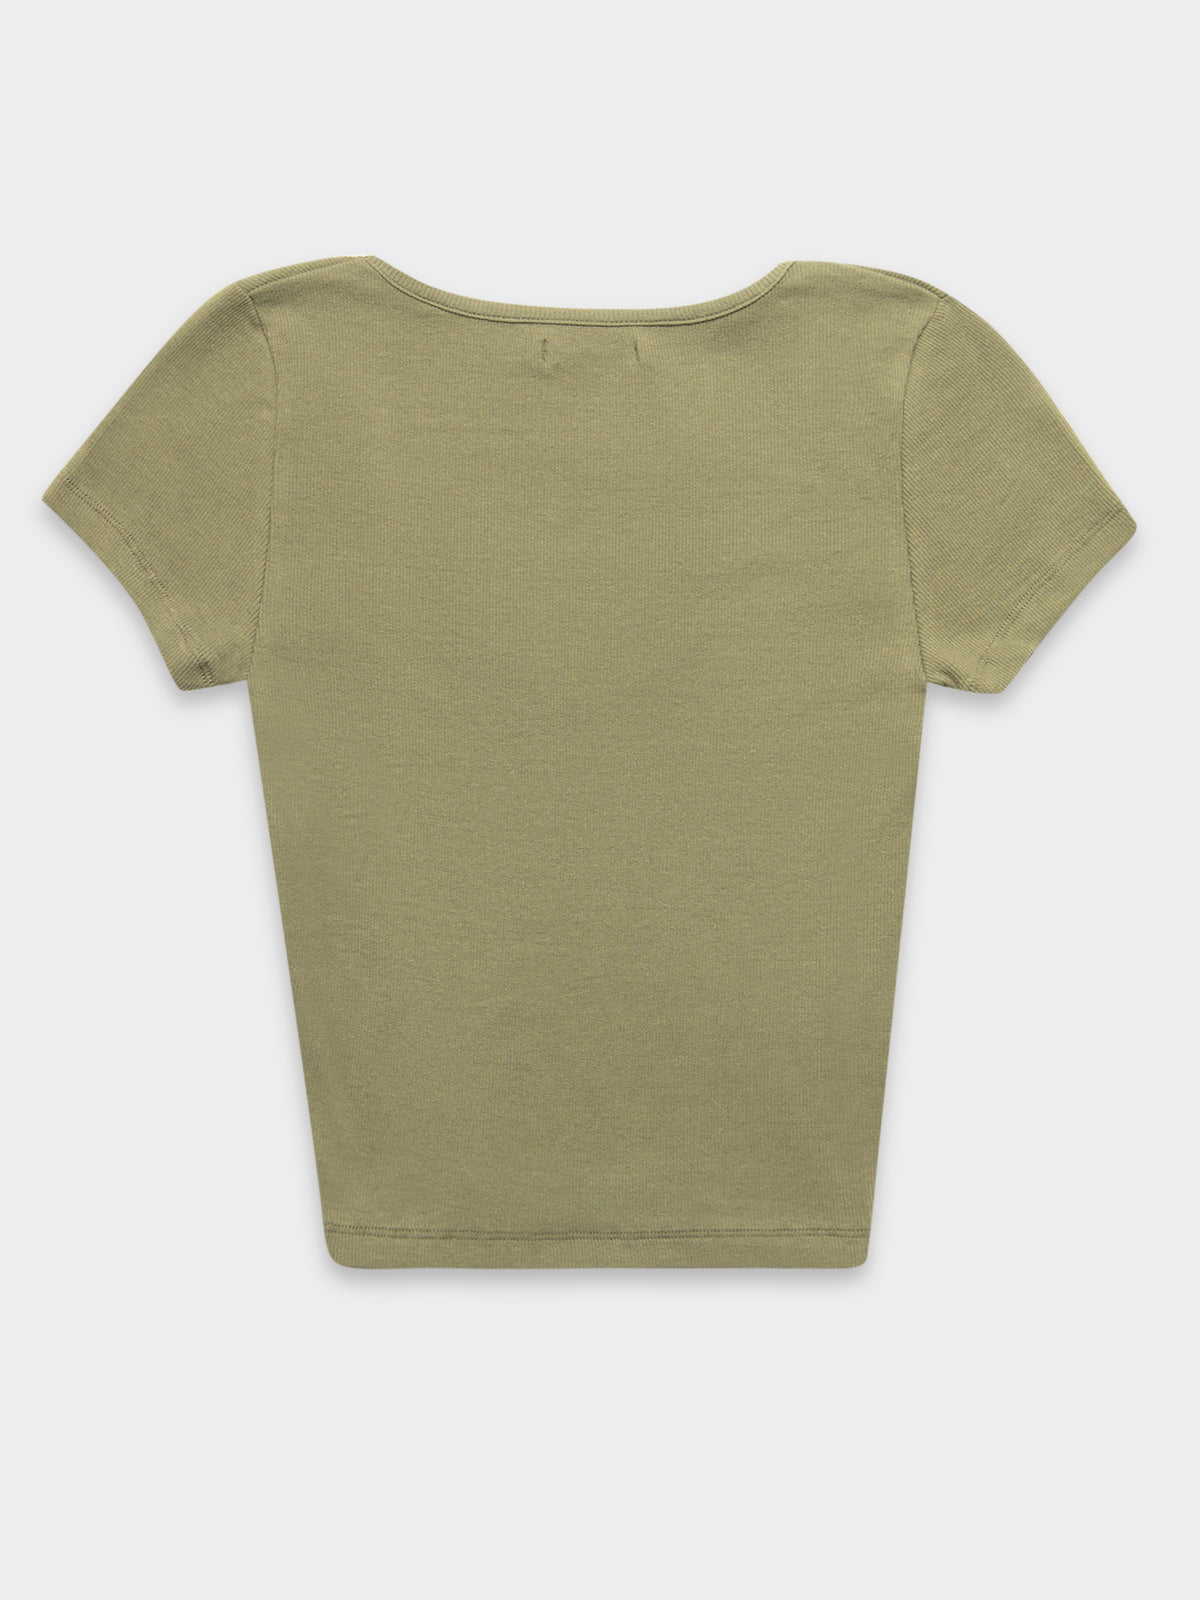 Bowie Cut Out T-Shirt in Olive